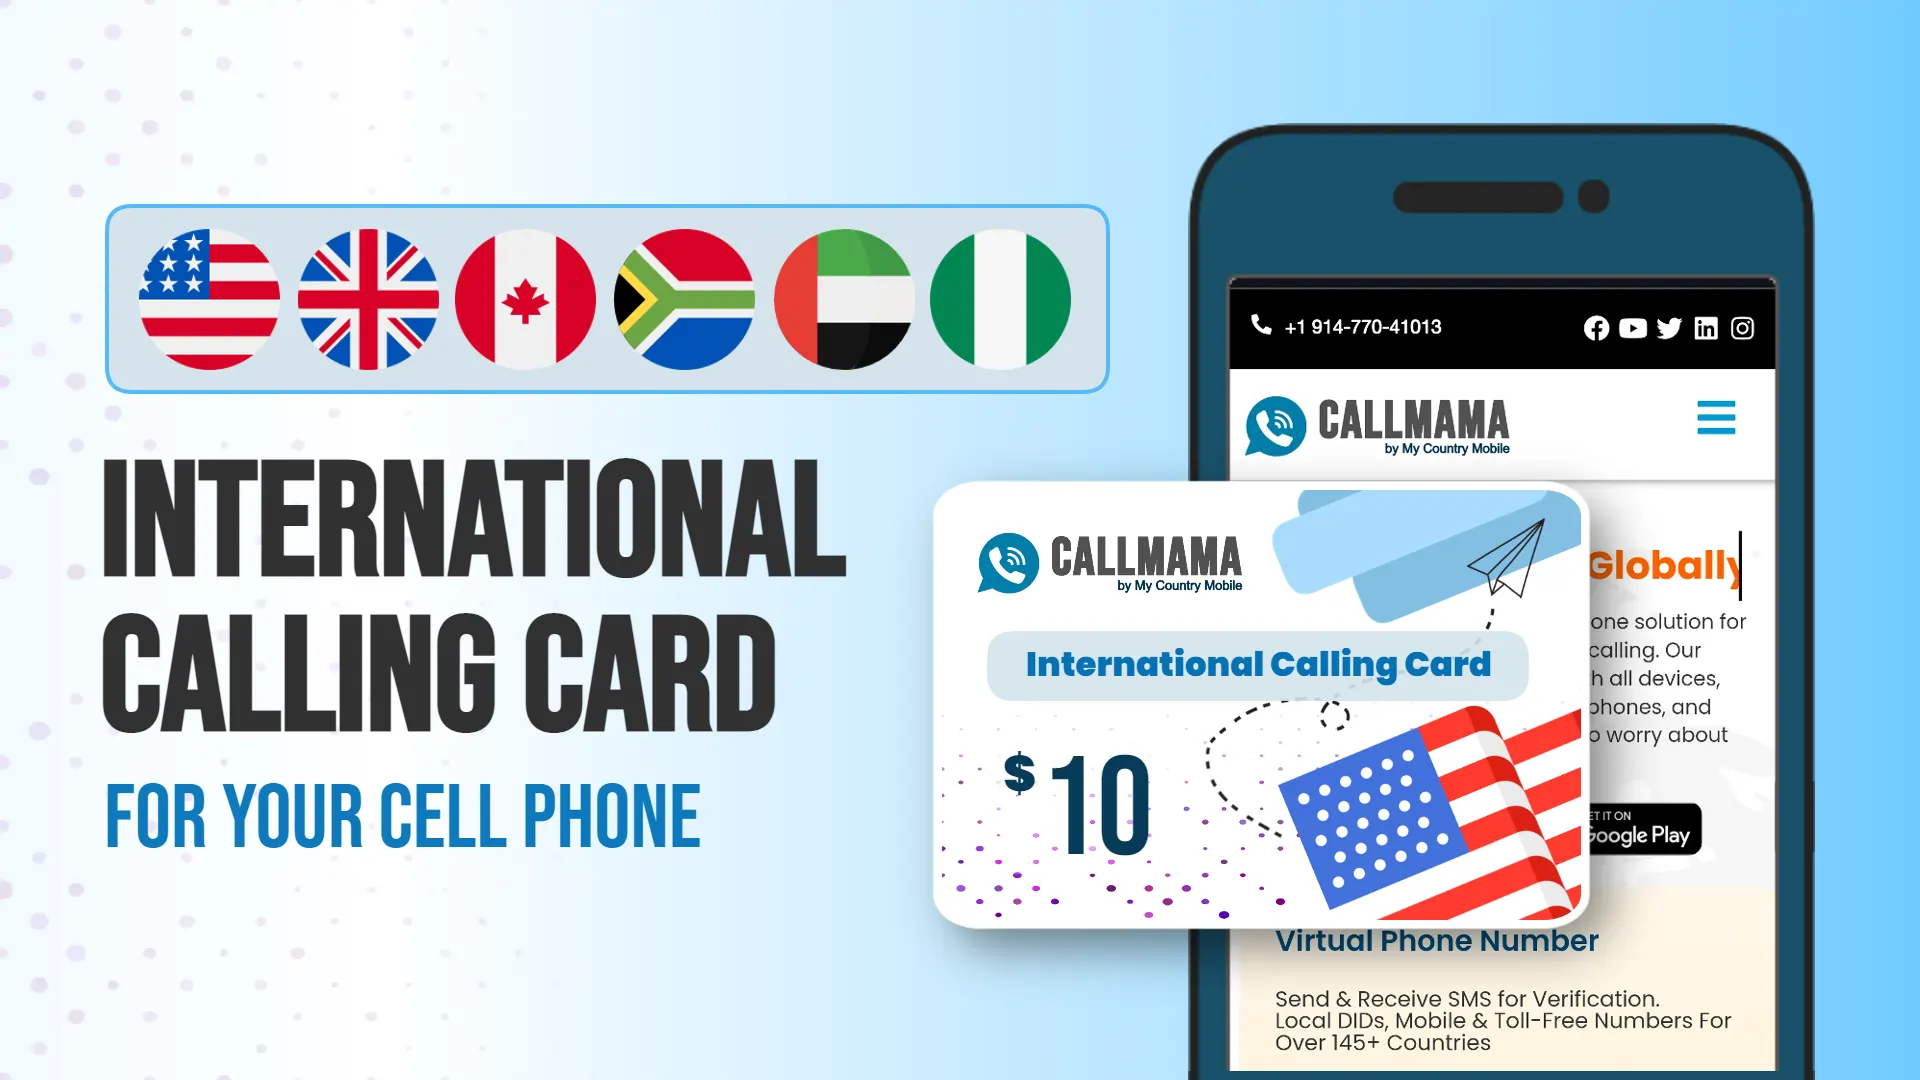 How to Use a Calling Card on a Cell Phone